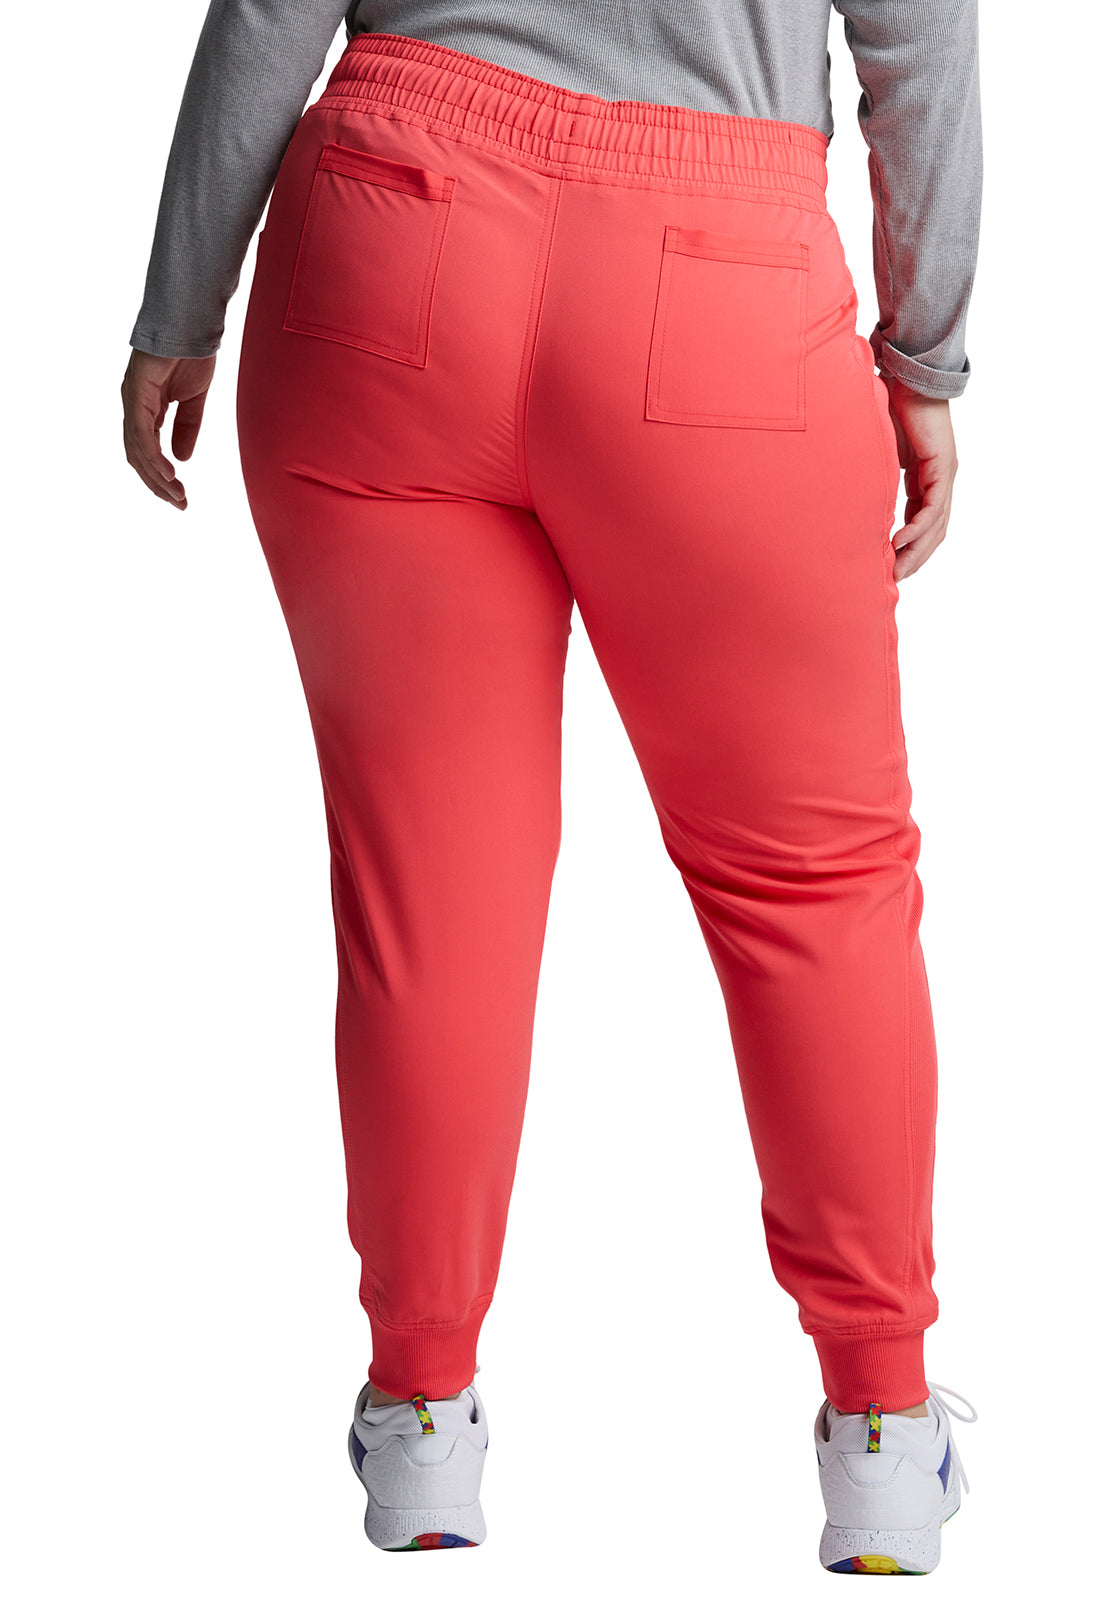 Laundry Day Sweatpants (plus Size) - Red